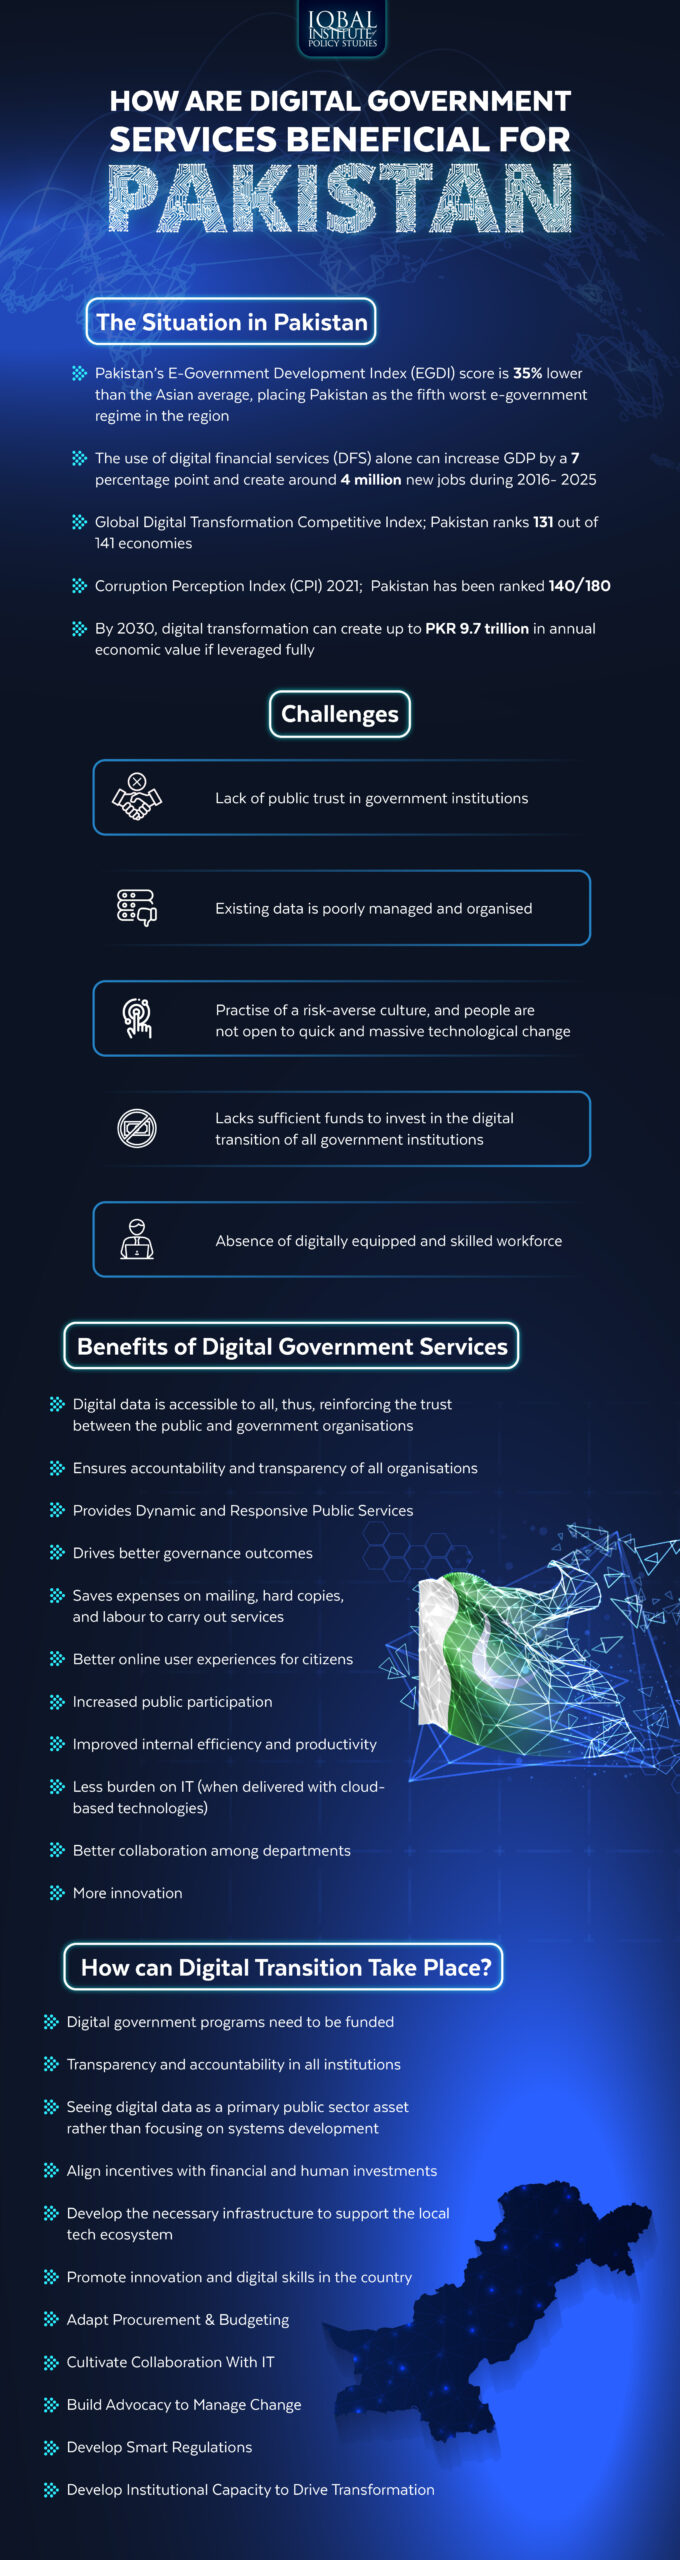 How are Digital Government Services Beneficial for Pakistan?